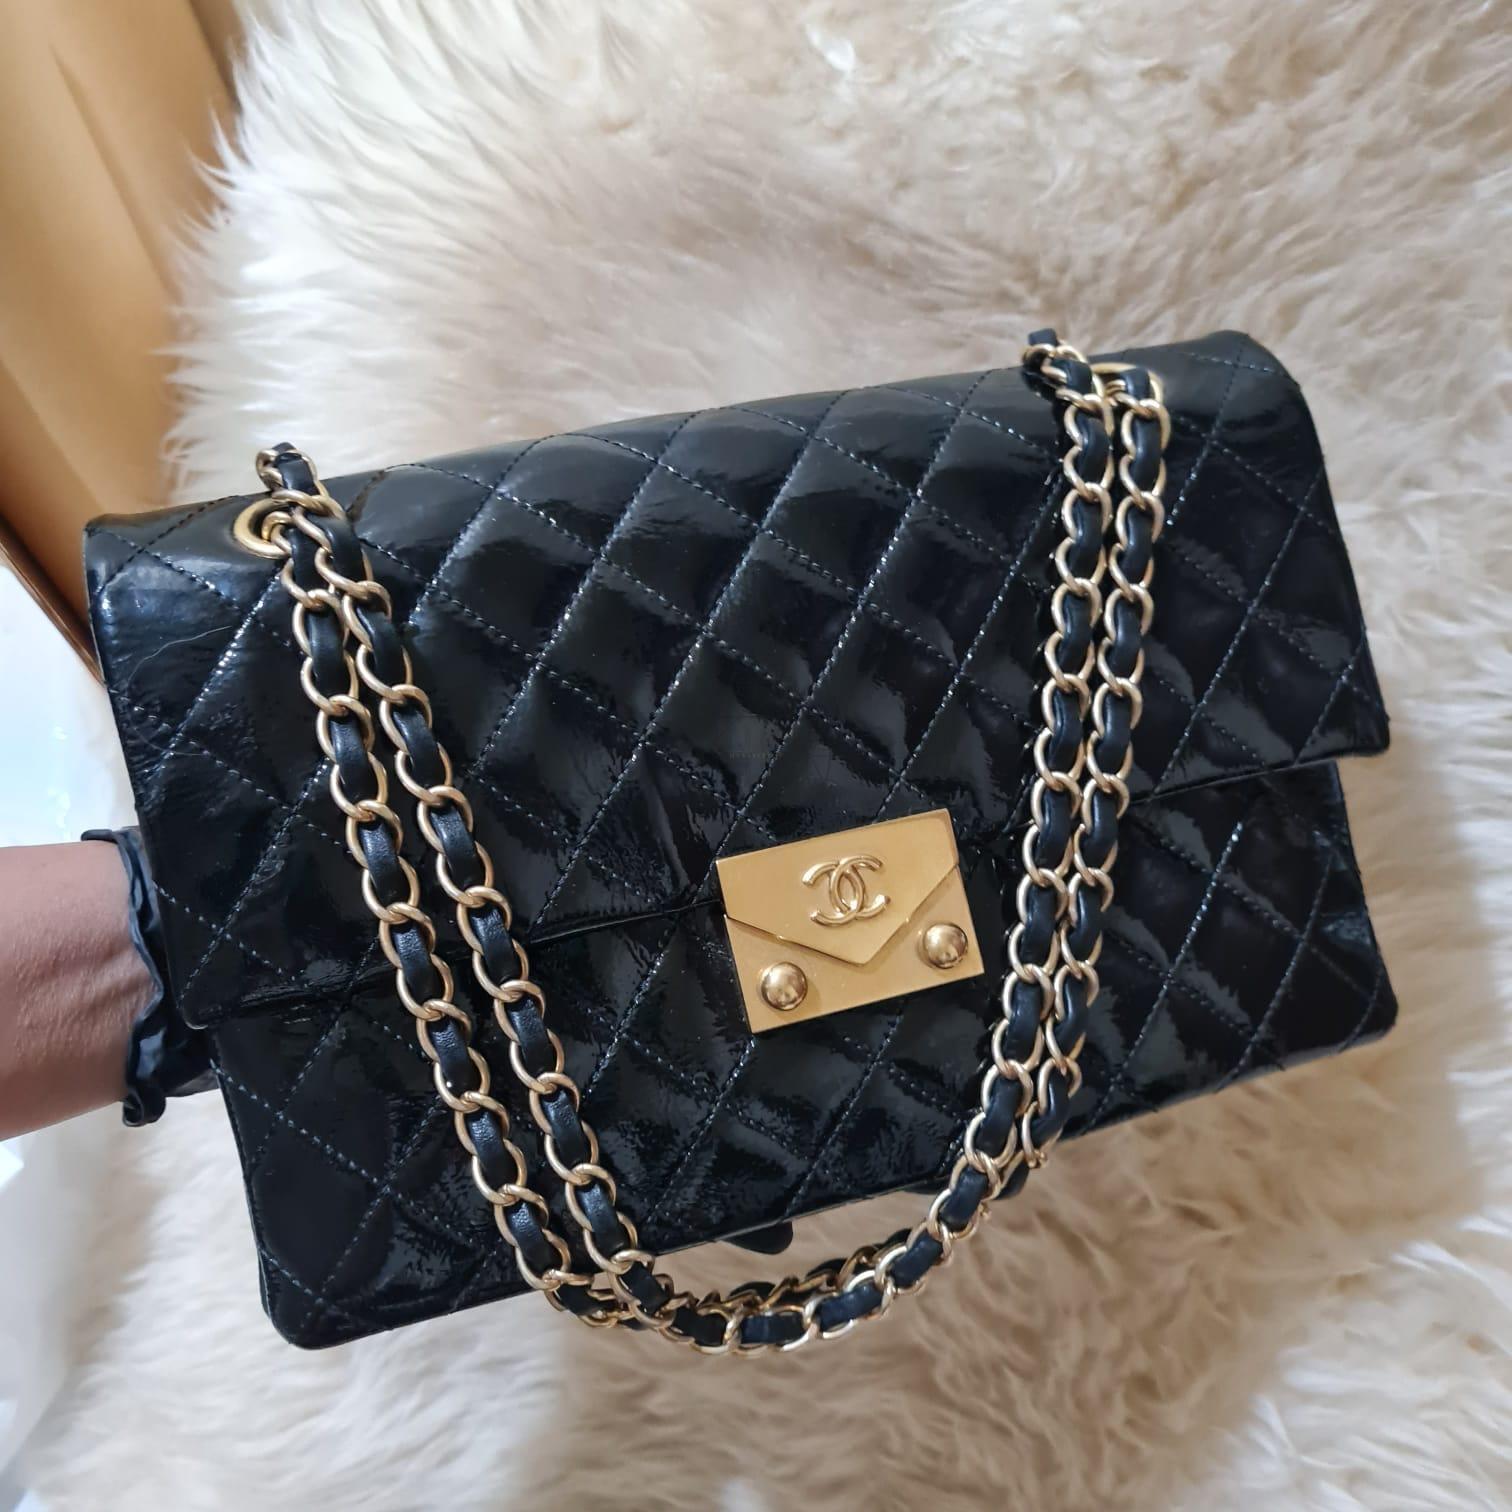 Chanel Black Patent Quilted Pagoda Accordion Medium Flap Bag For Sale 7